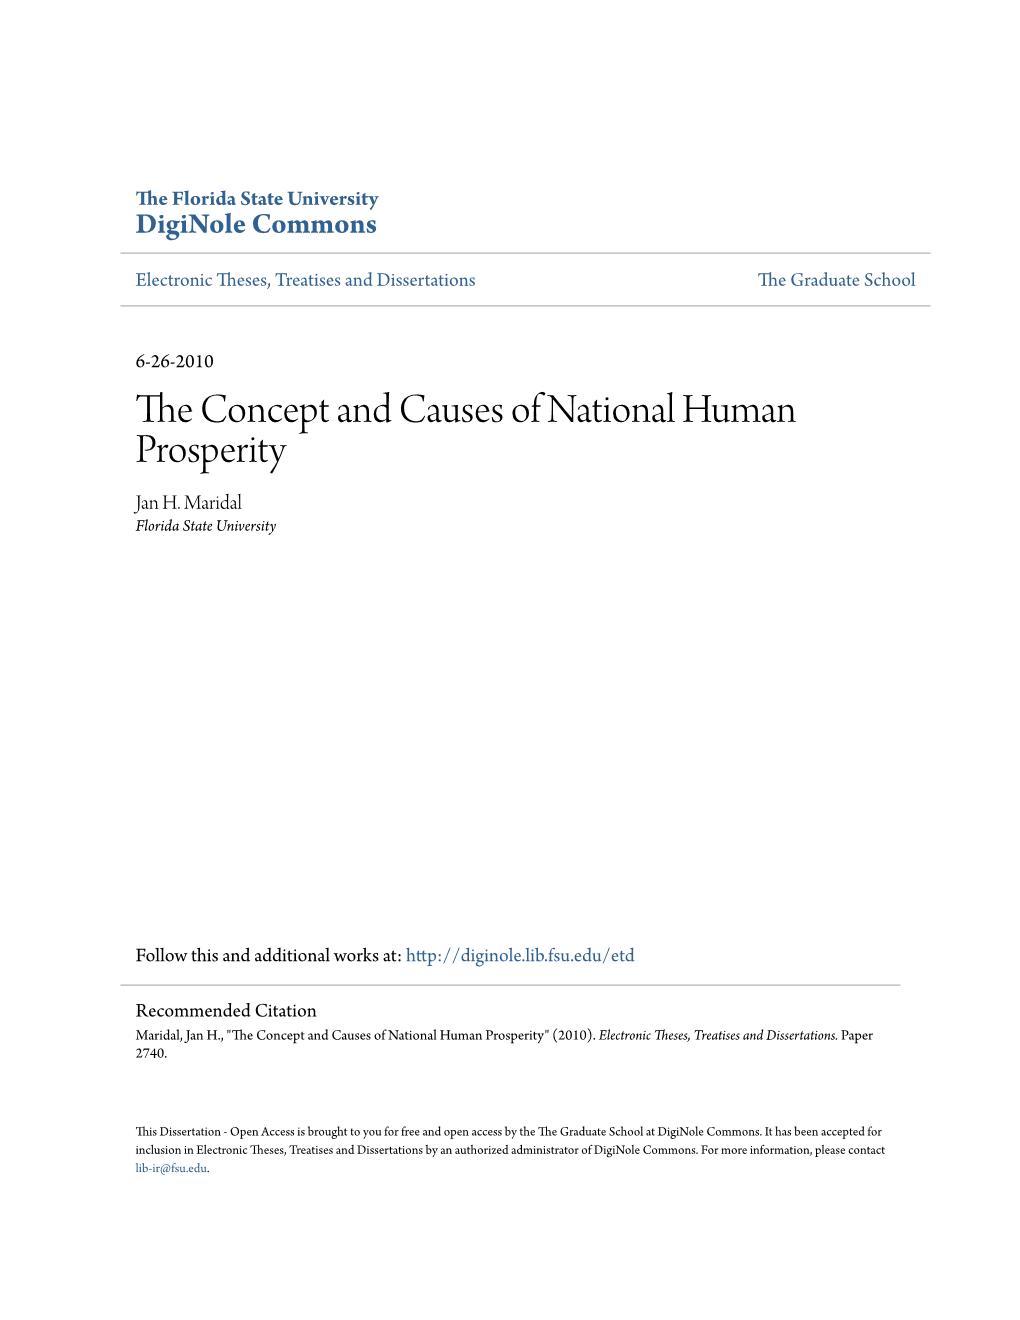 The Concept and Causes of National Human Prosperity